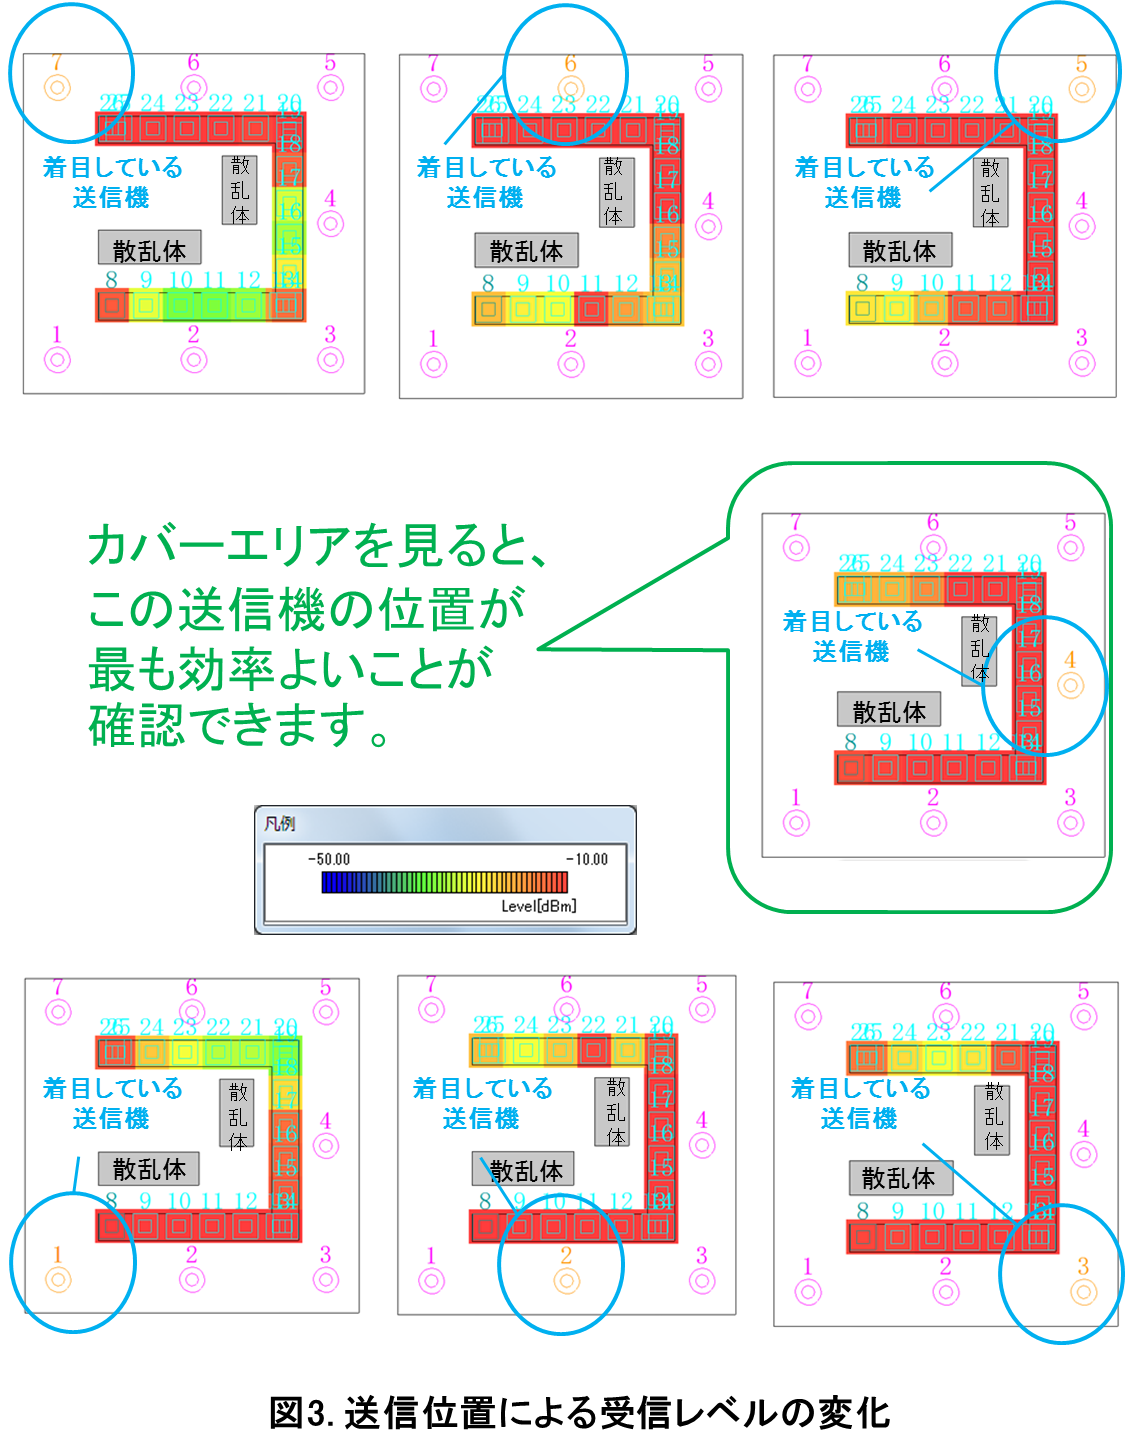 http://network.kke.co.jp/products/images/RFID_920MHz_pic3.png